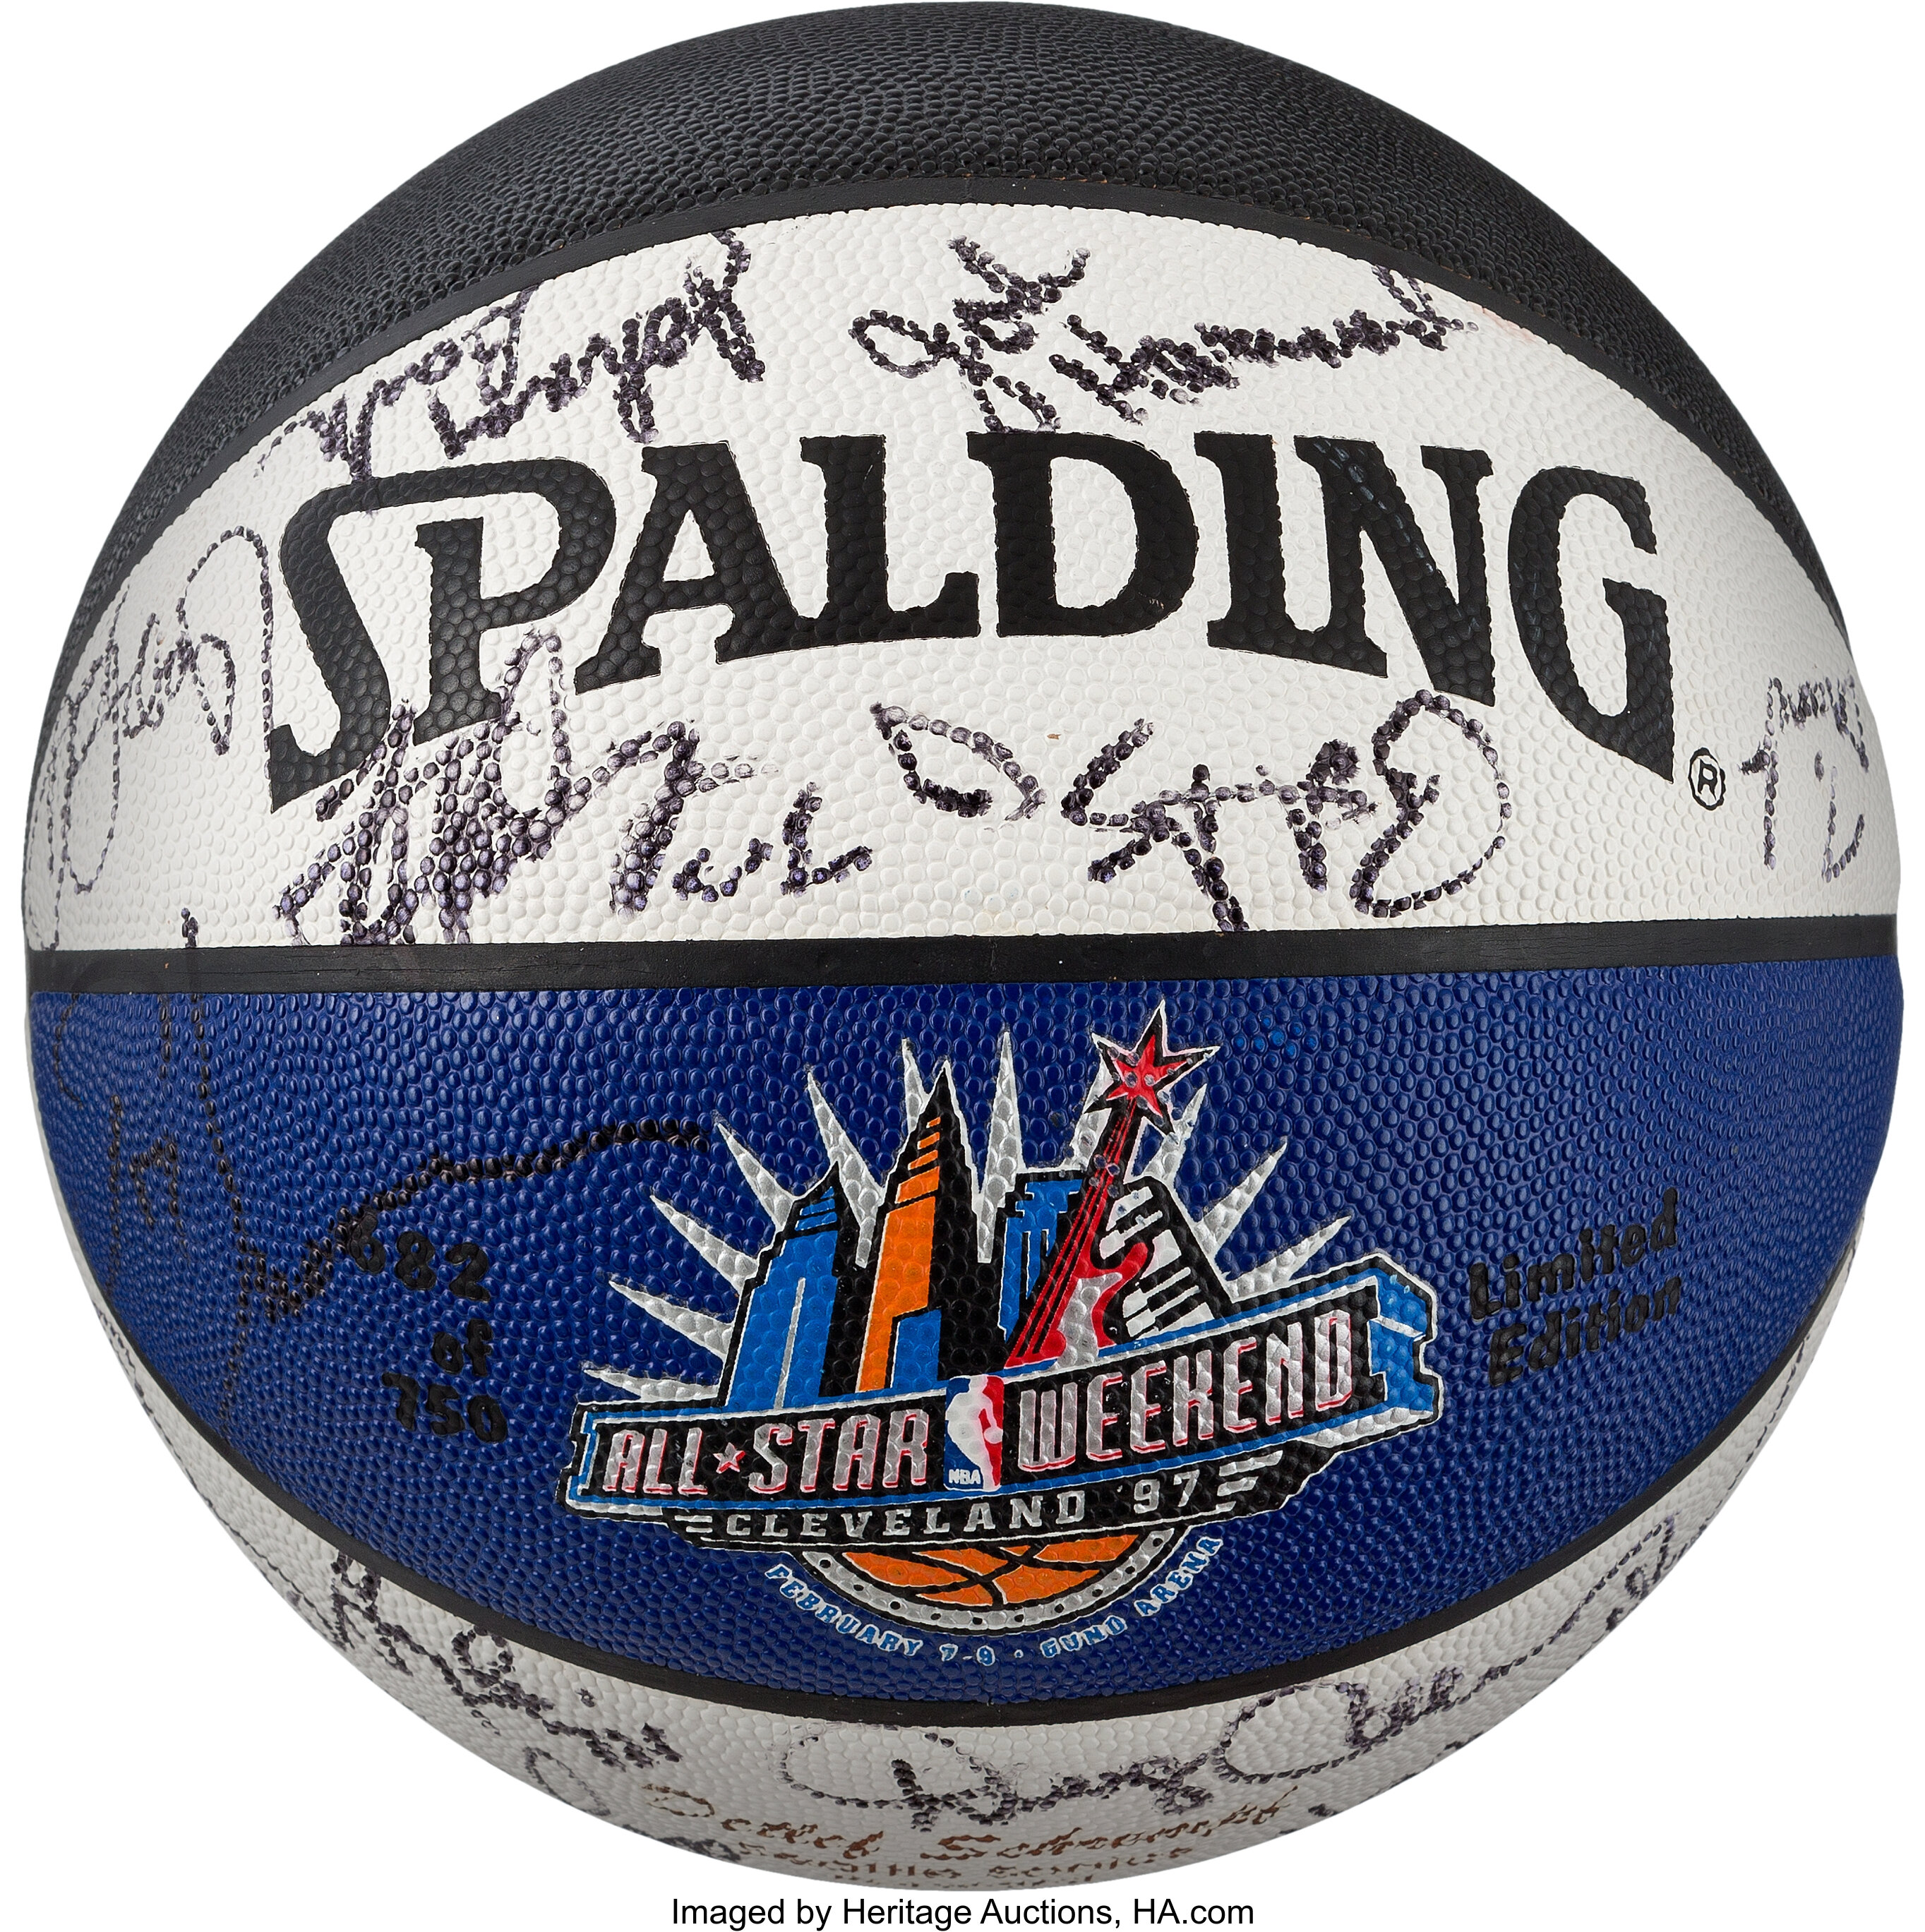 1997 NBA All-Star Team Signed Basketball from Detlef Schrempf's, Lot  #82443